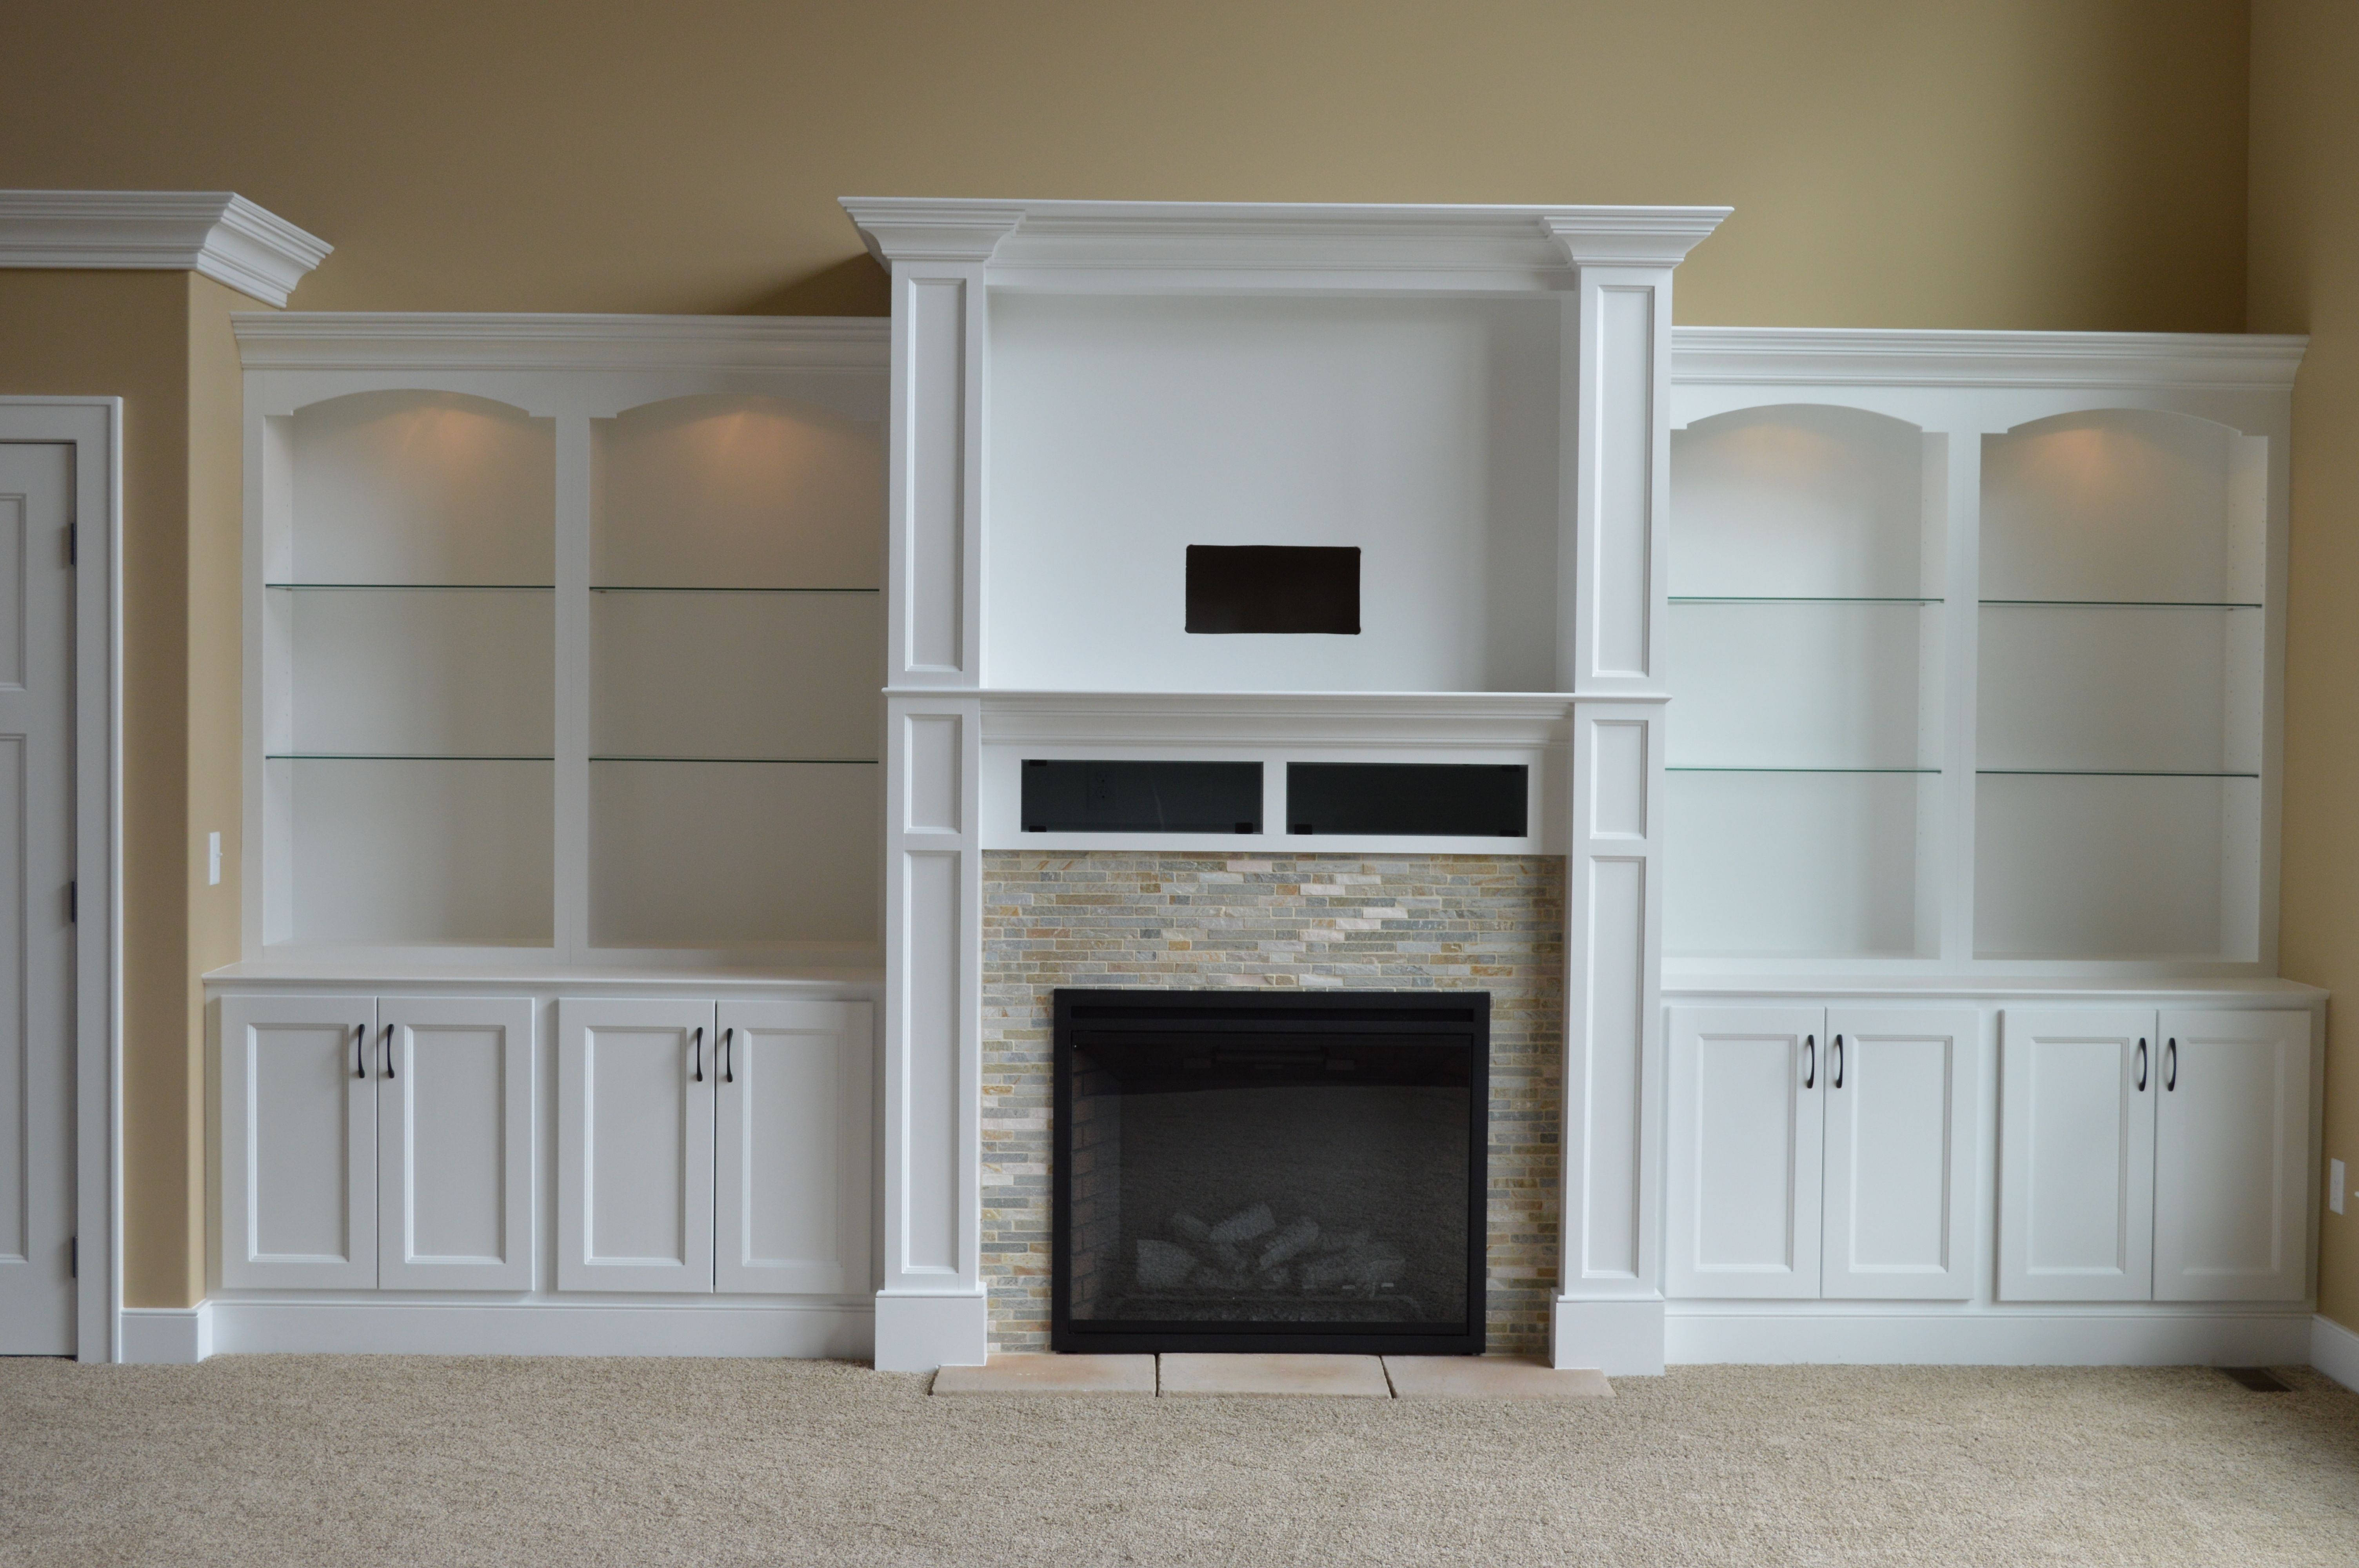 Built In Fireplace Cabinets Unique Painted Poplar Wall Built In with Subtle Stone Accented